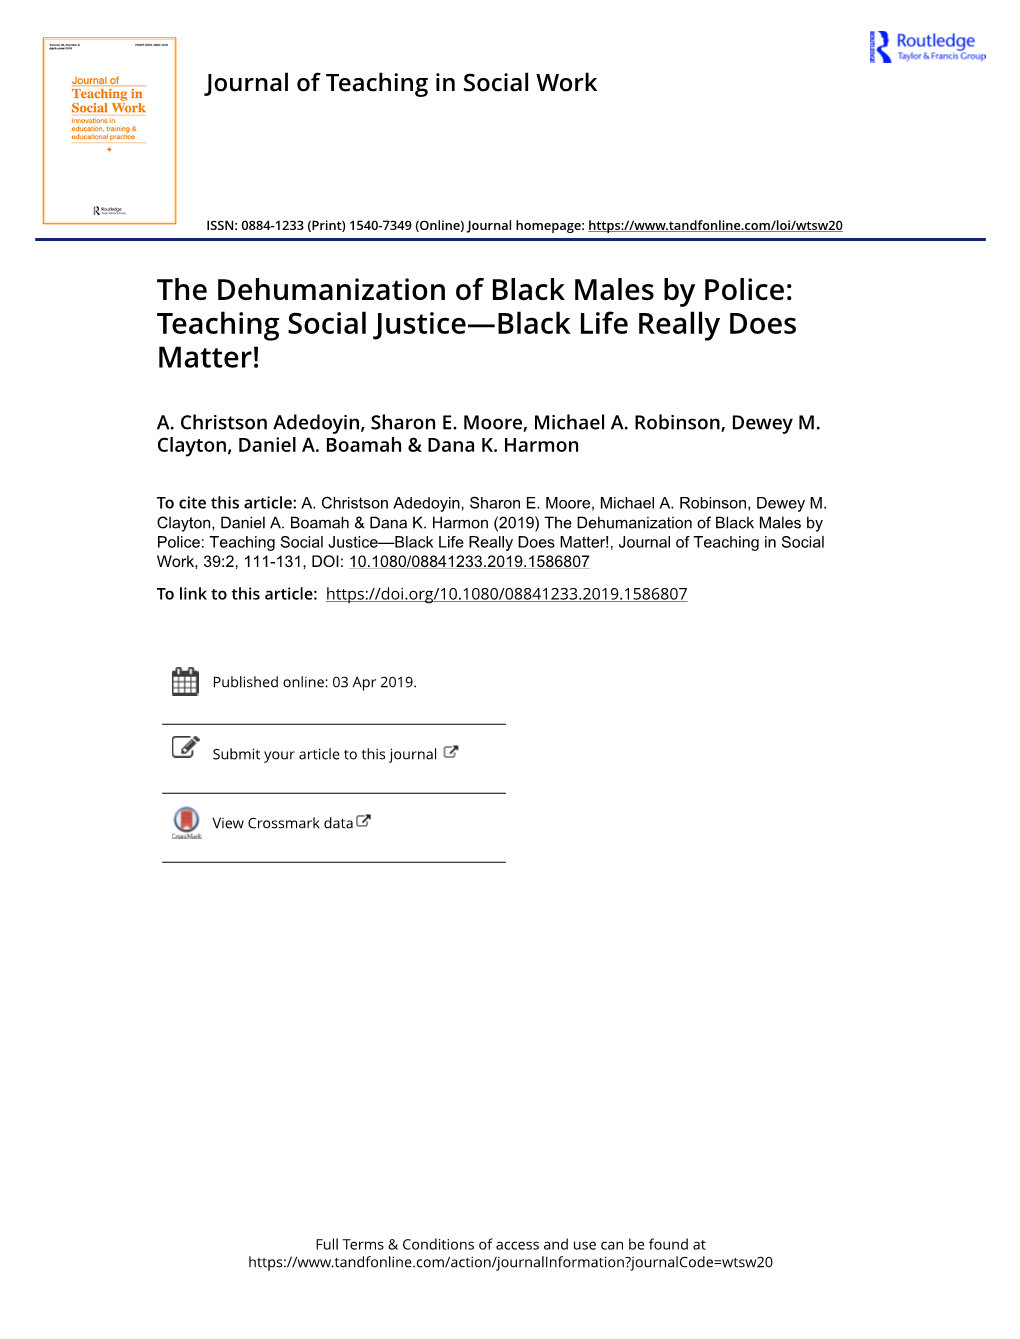 The Dehumanization of Black Males by Police: Teaching Social Justice—Black Life Really Does Matter!